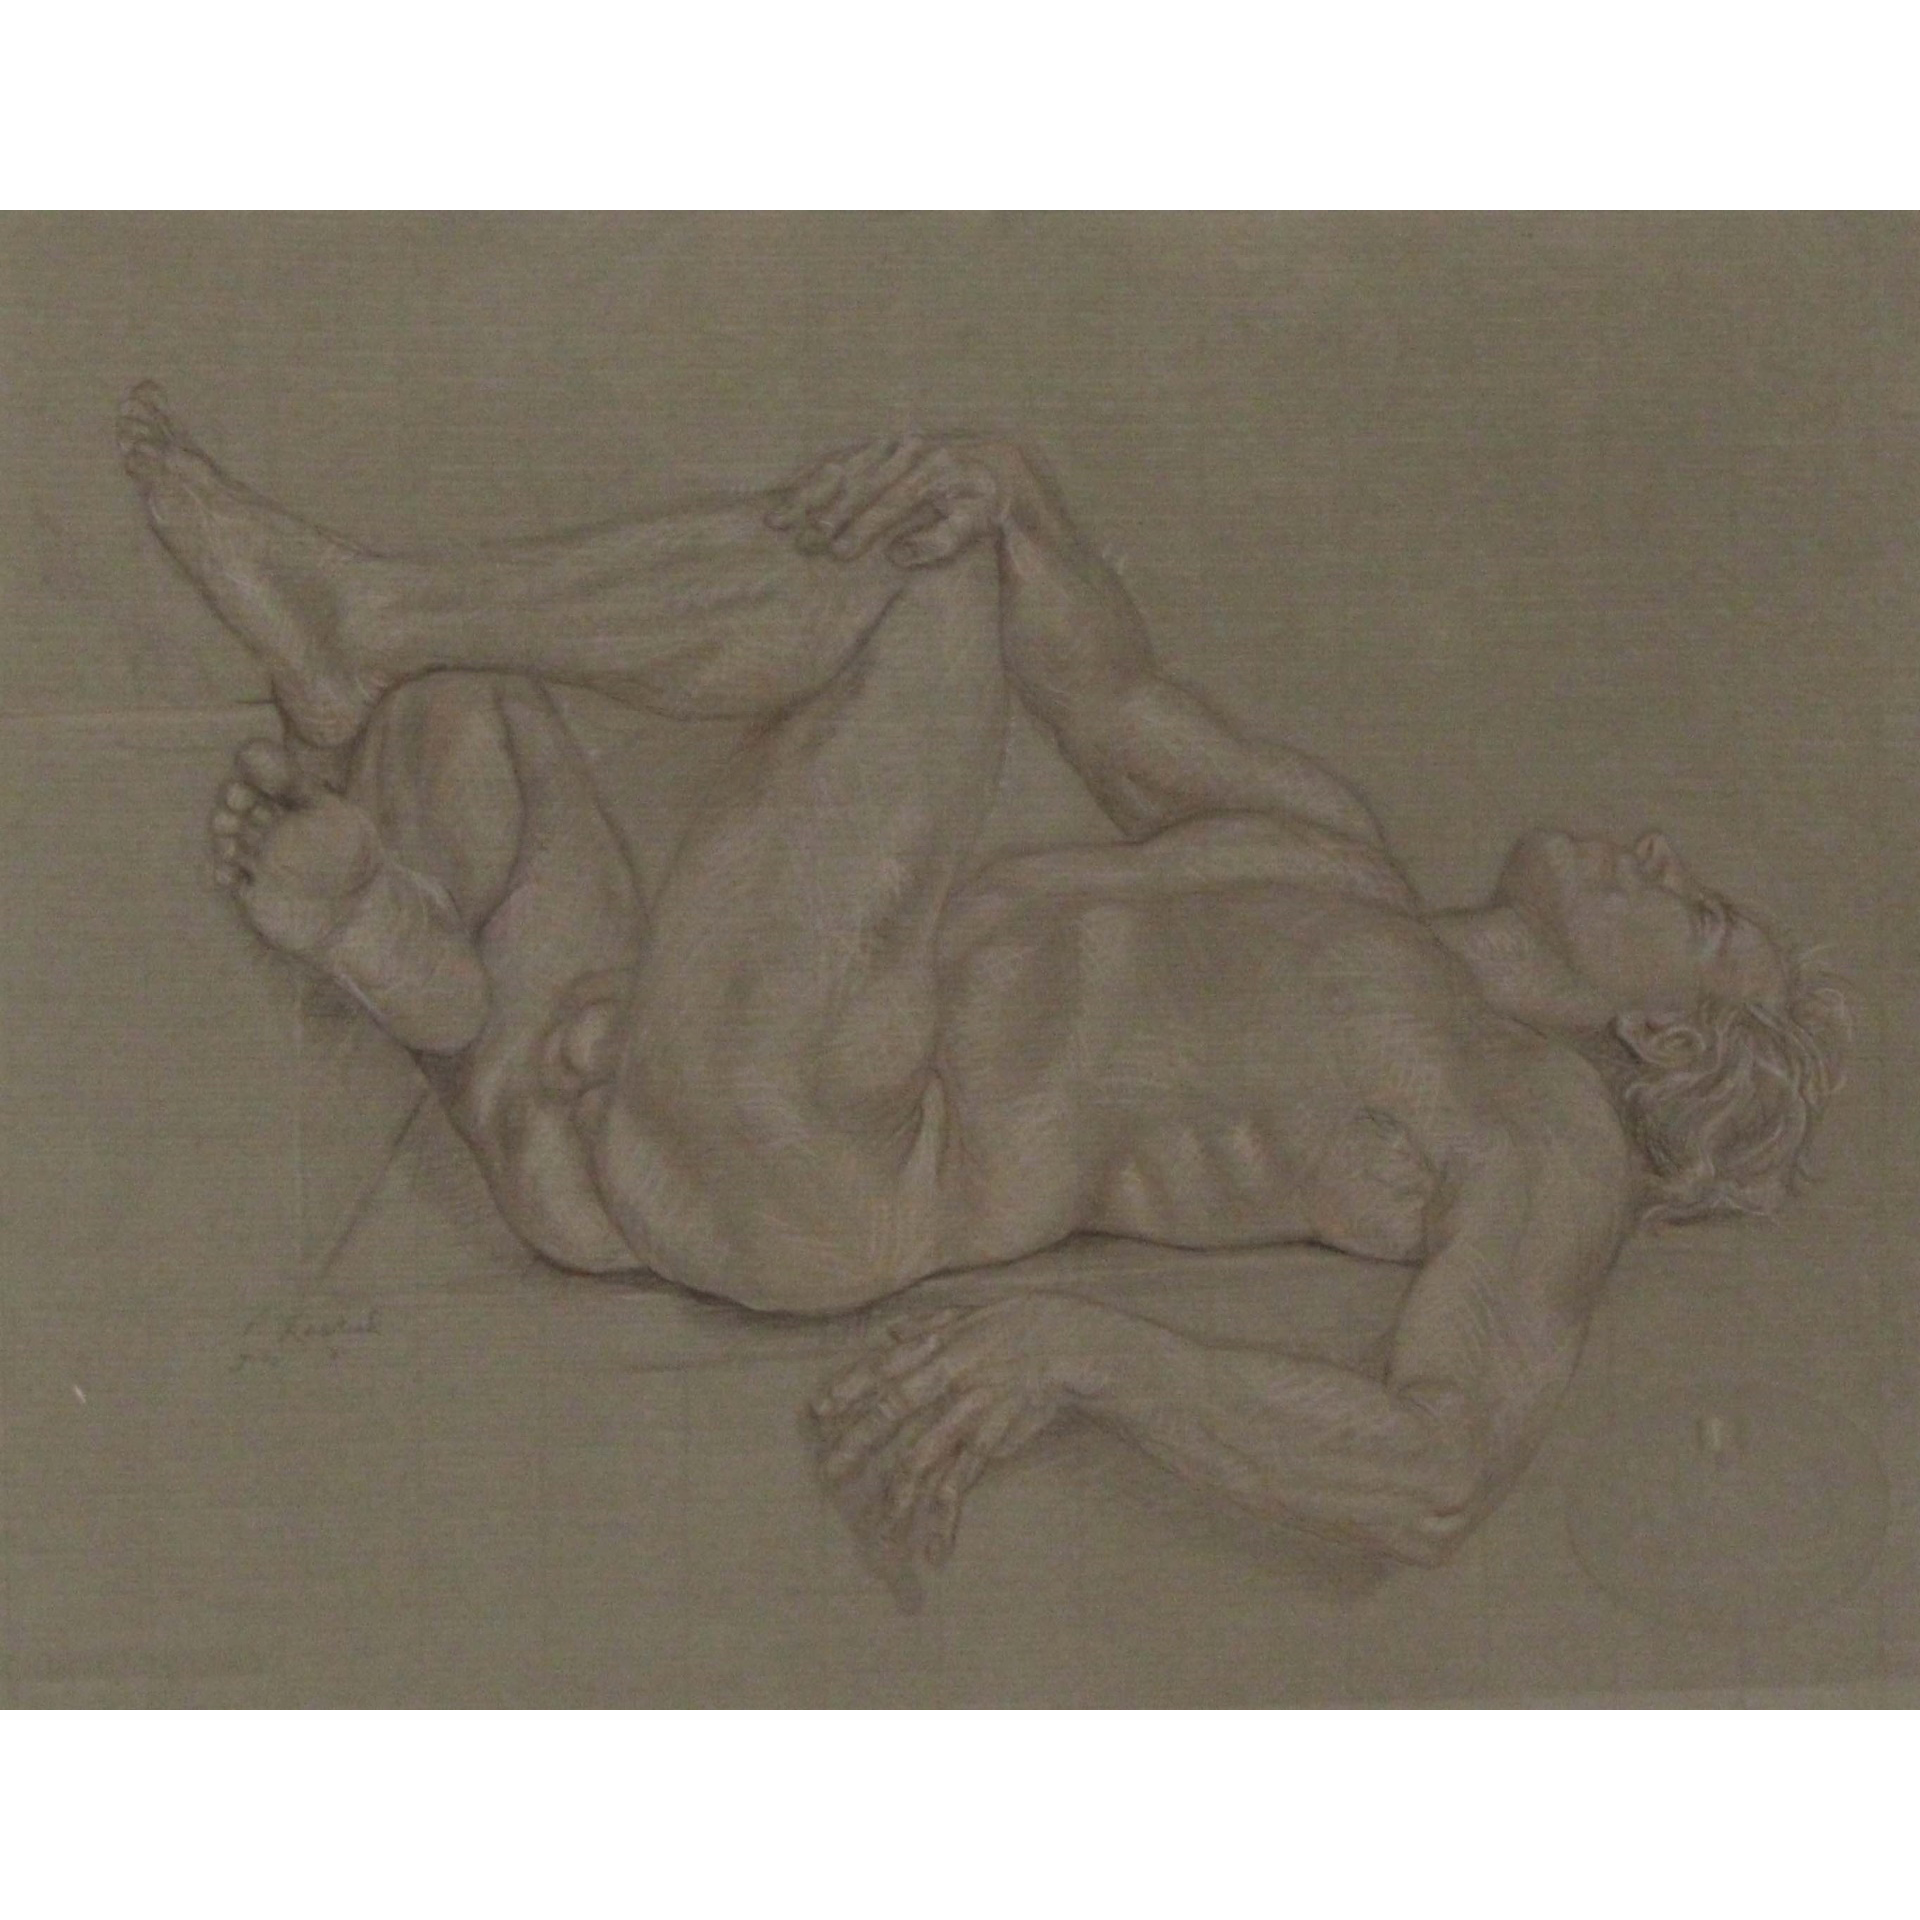 APhylis Raskind - Male Nude - Crayon On Paper Painting | Work of Man